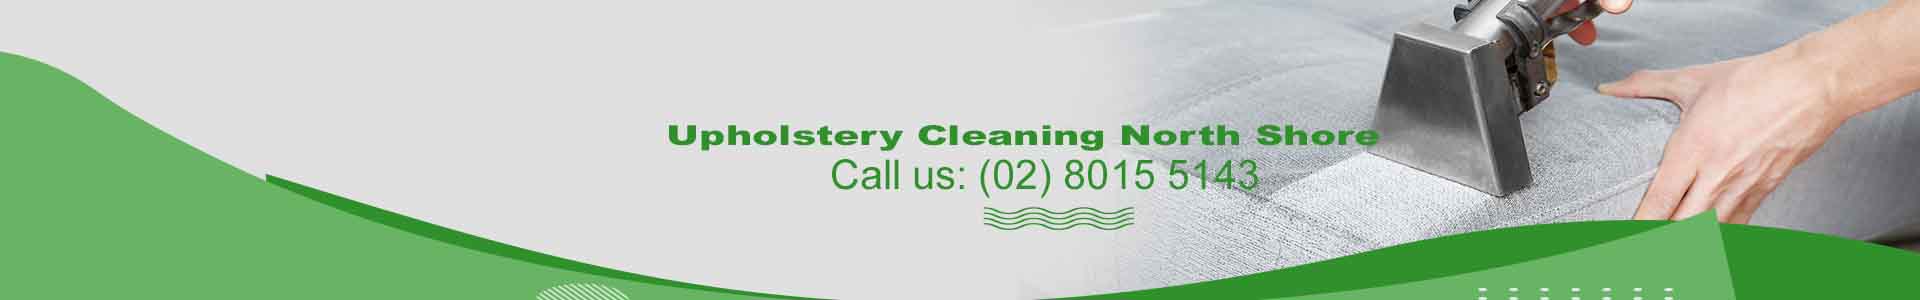 Upholstery Cleaning North Shore